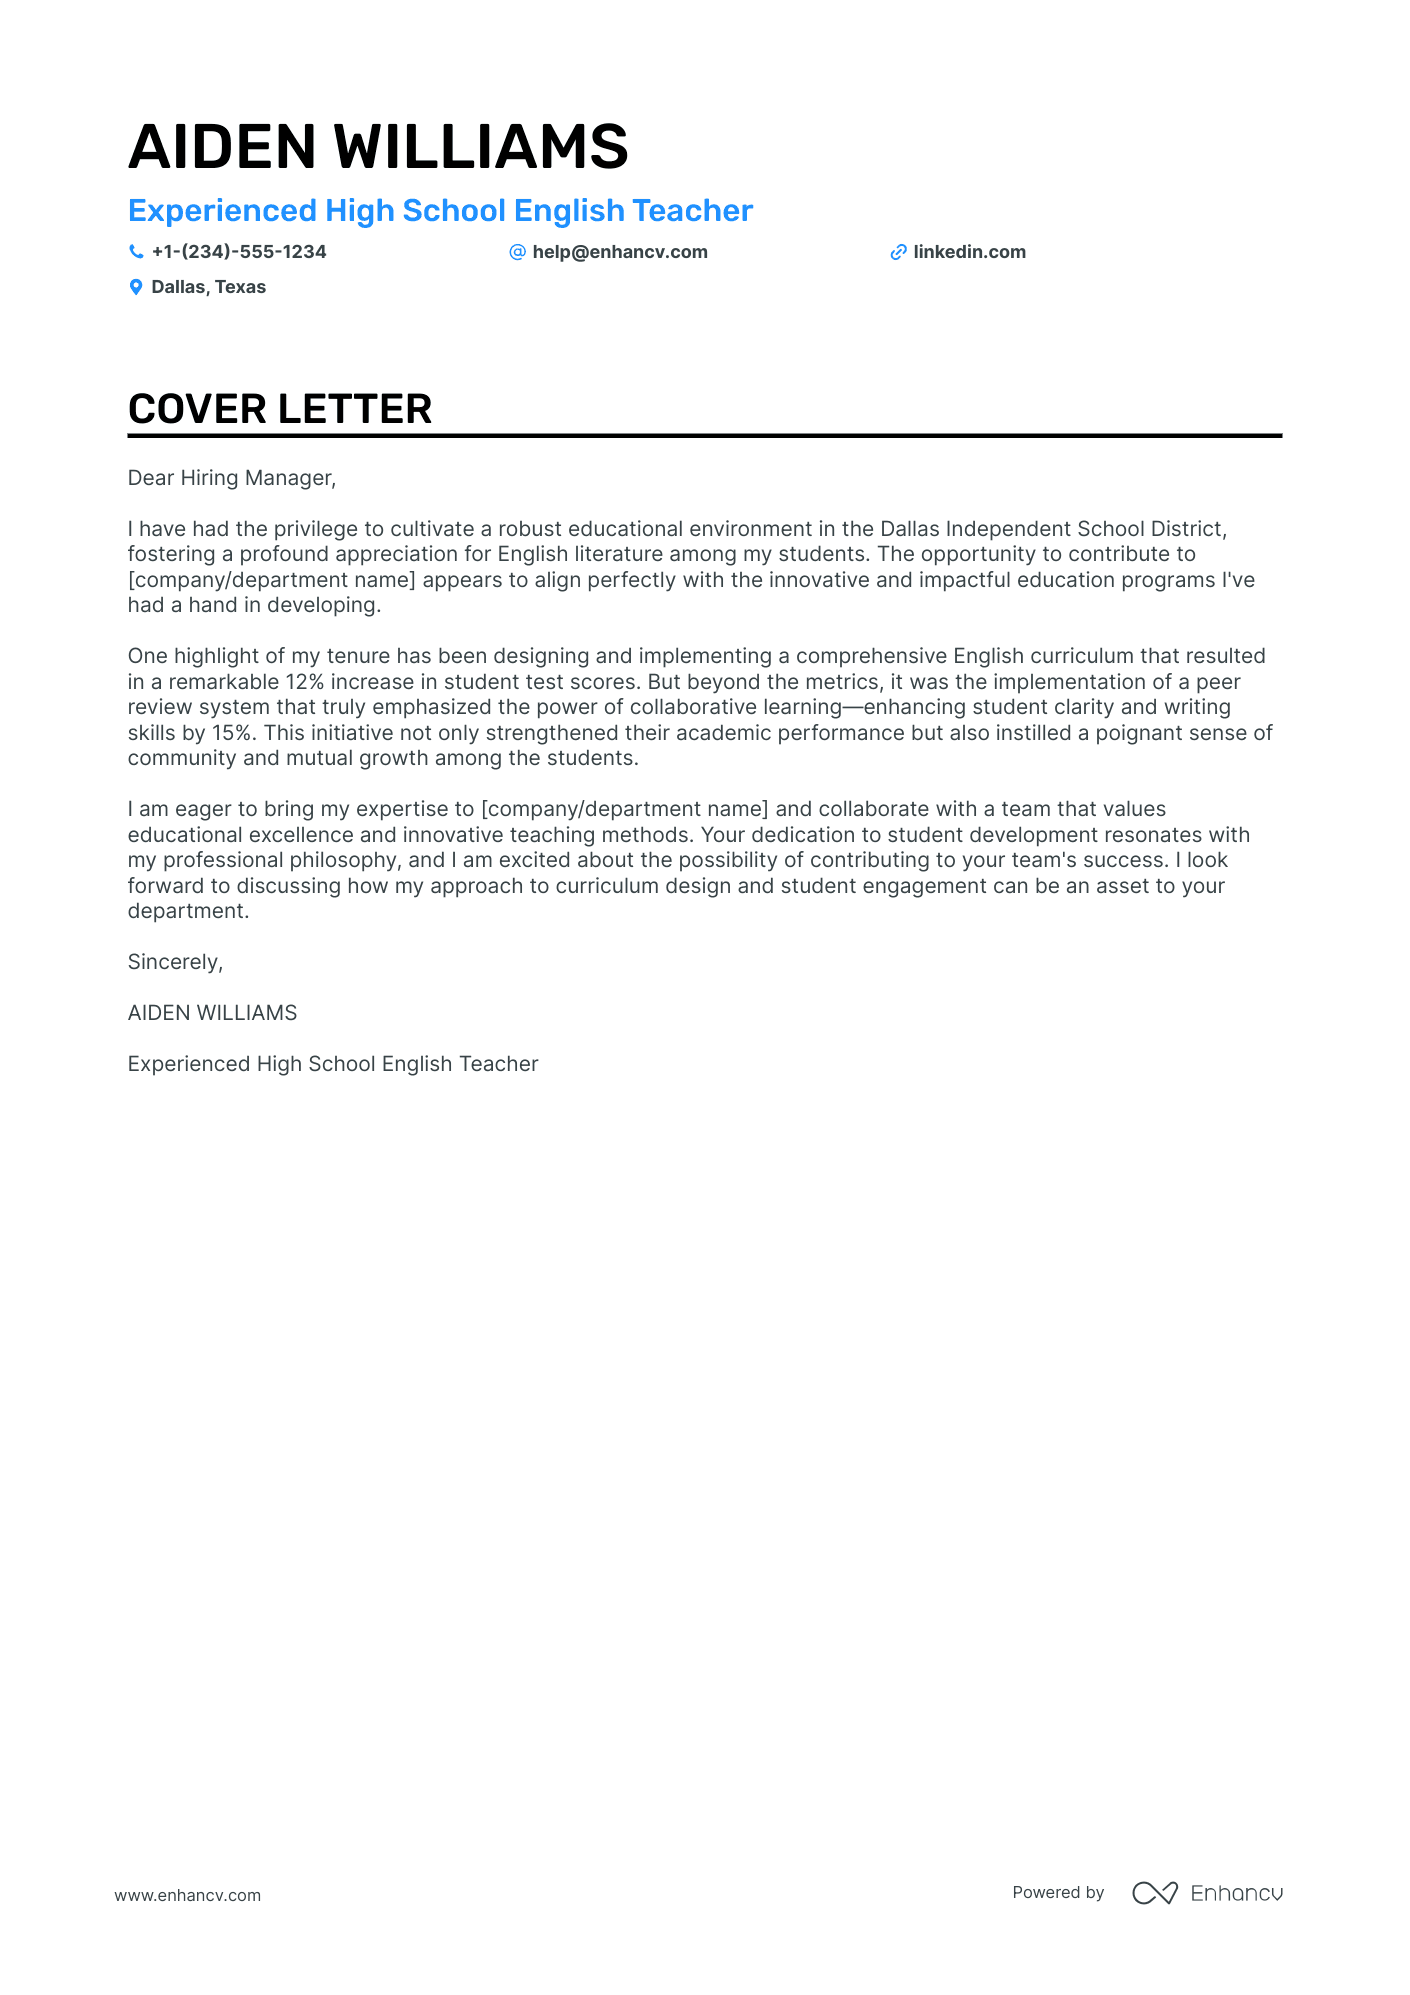 application letter for teaching in english